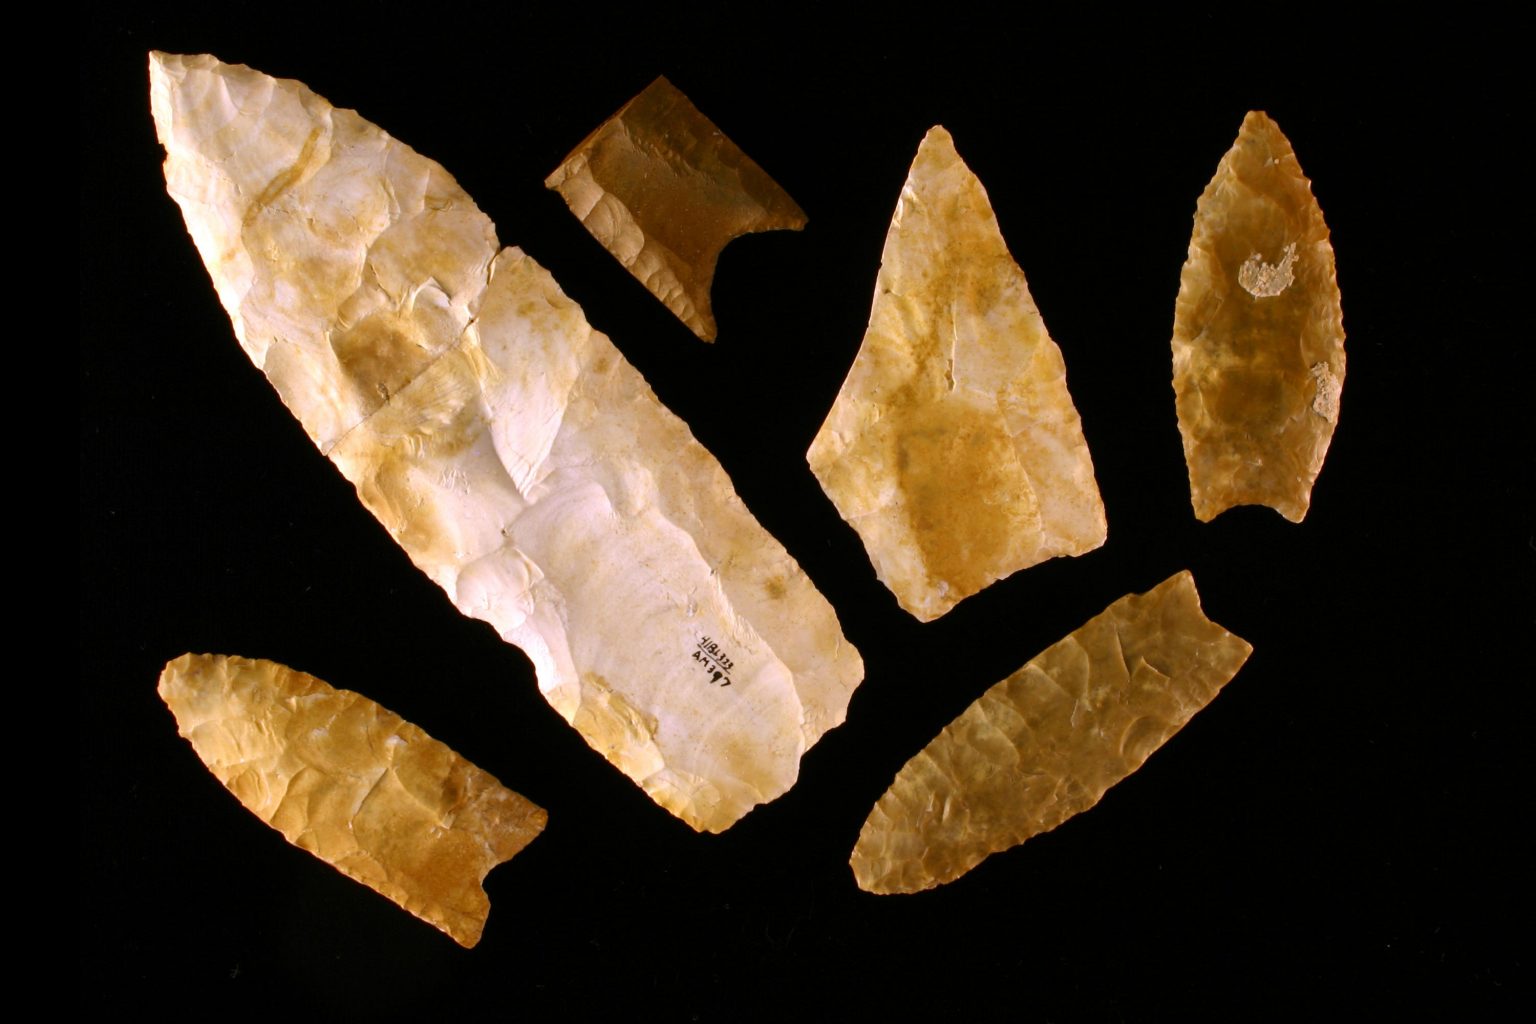  Five ancient spear points made from stone in a preClovis culture.